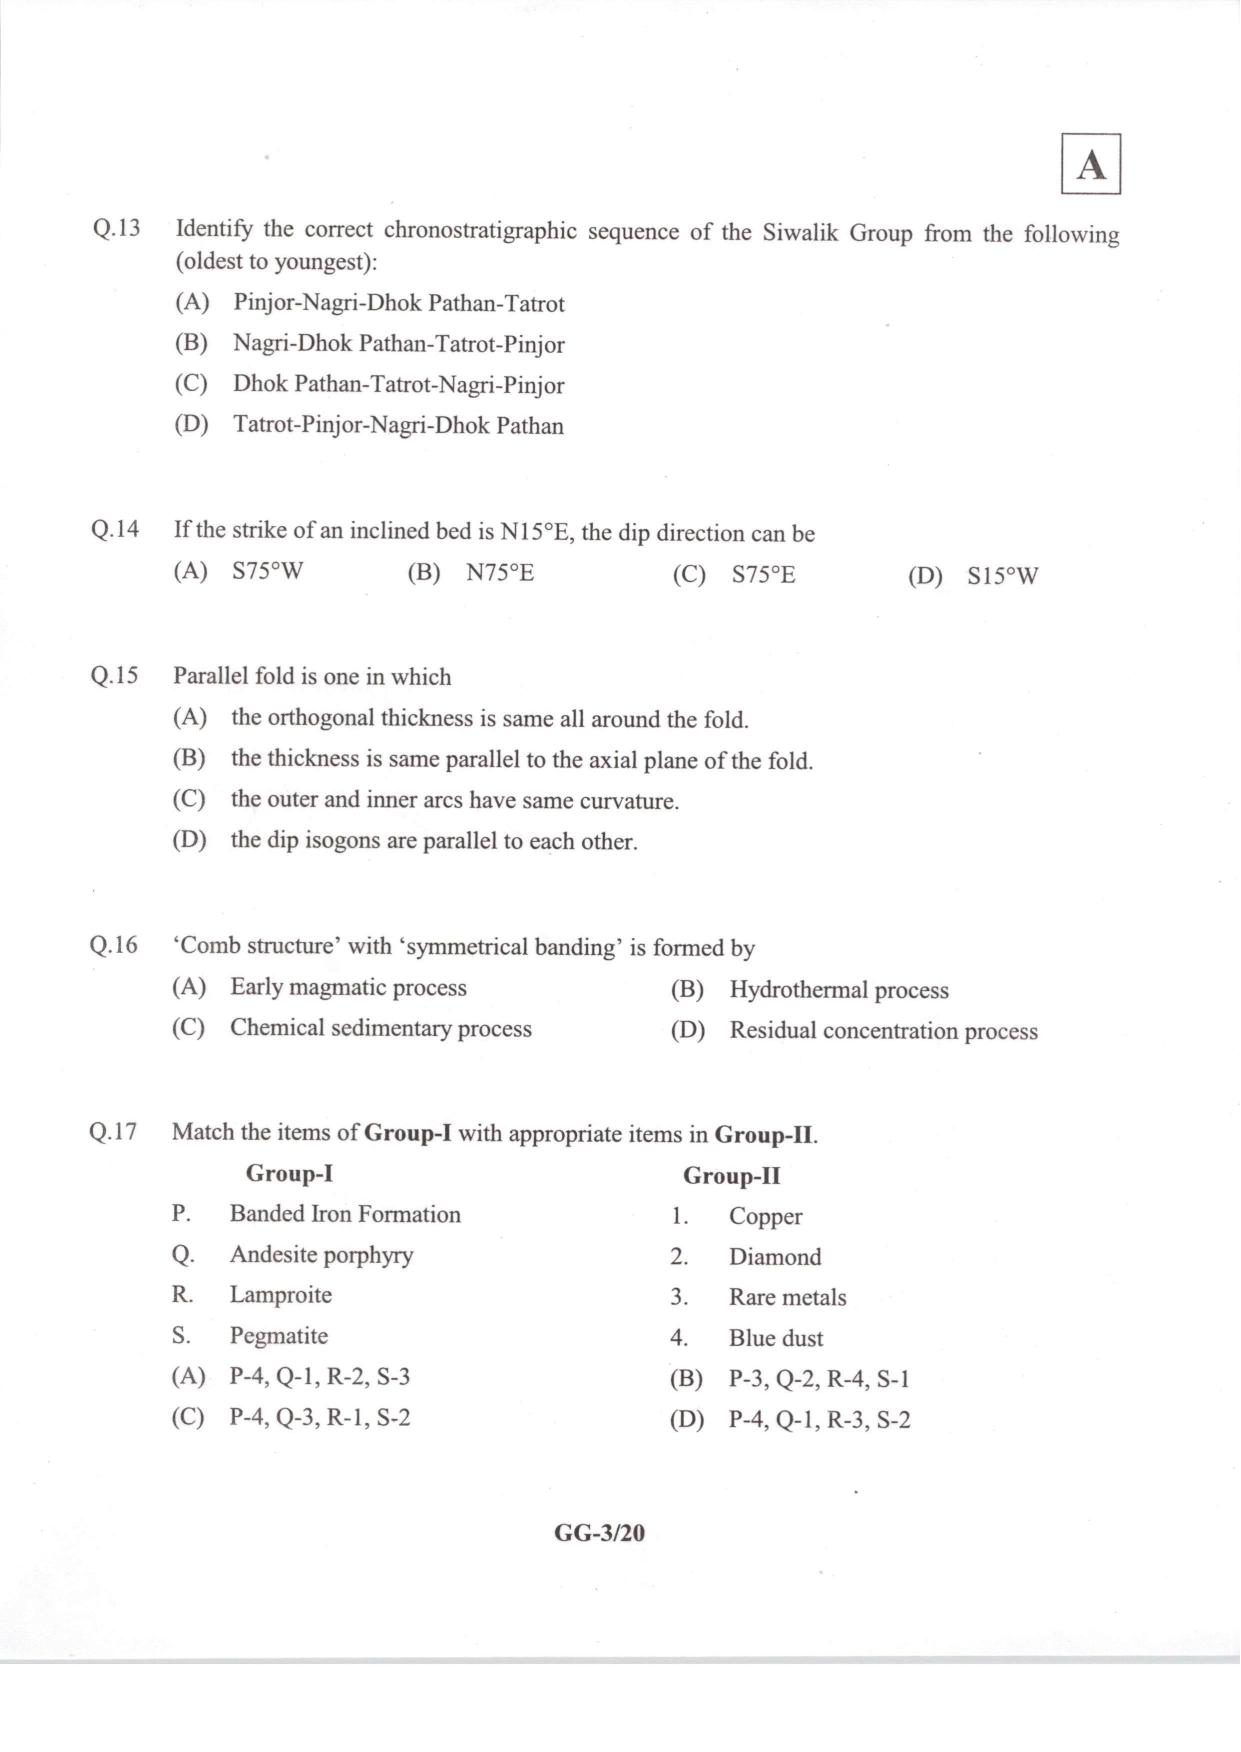 JAM 2014: GG Question Paper - Page 5